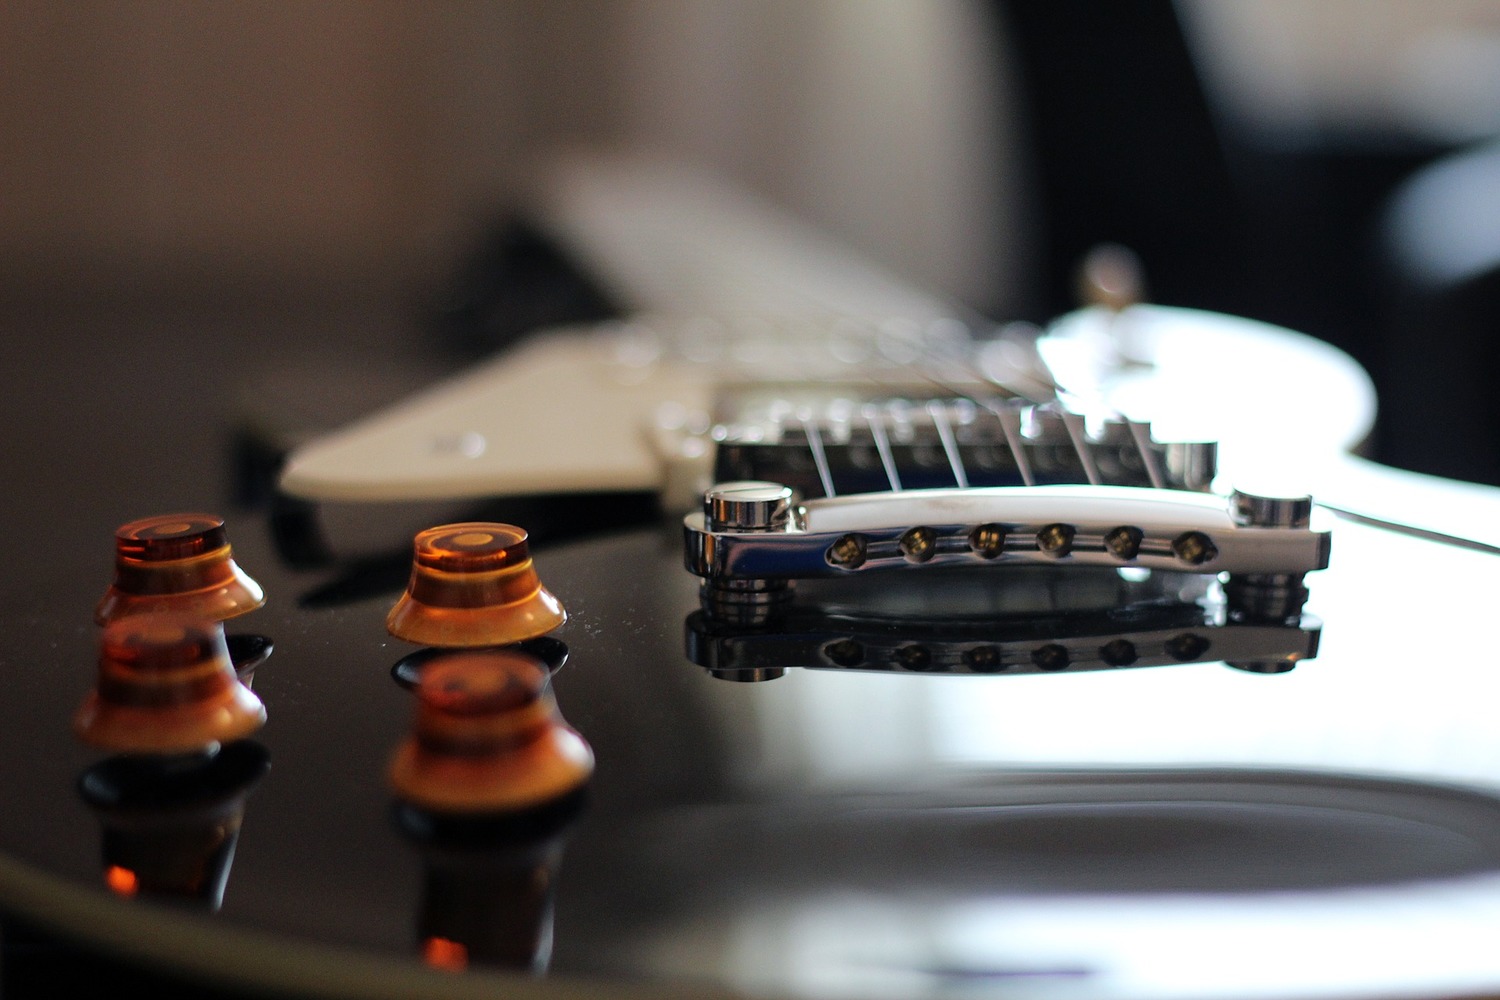 Guitar Maintenance: How To Fix Loose Tuners